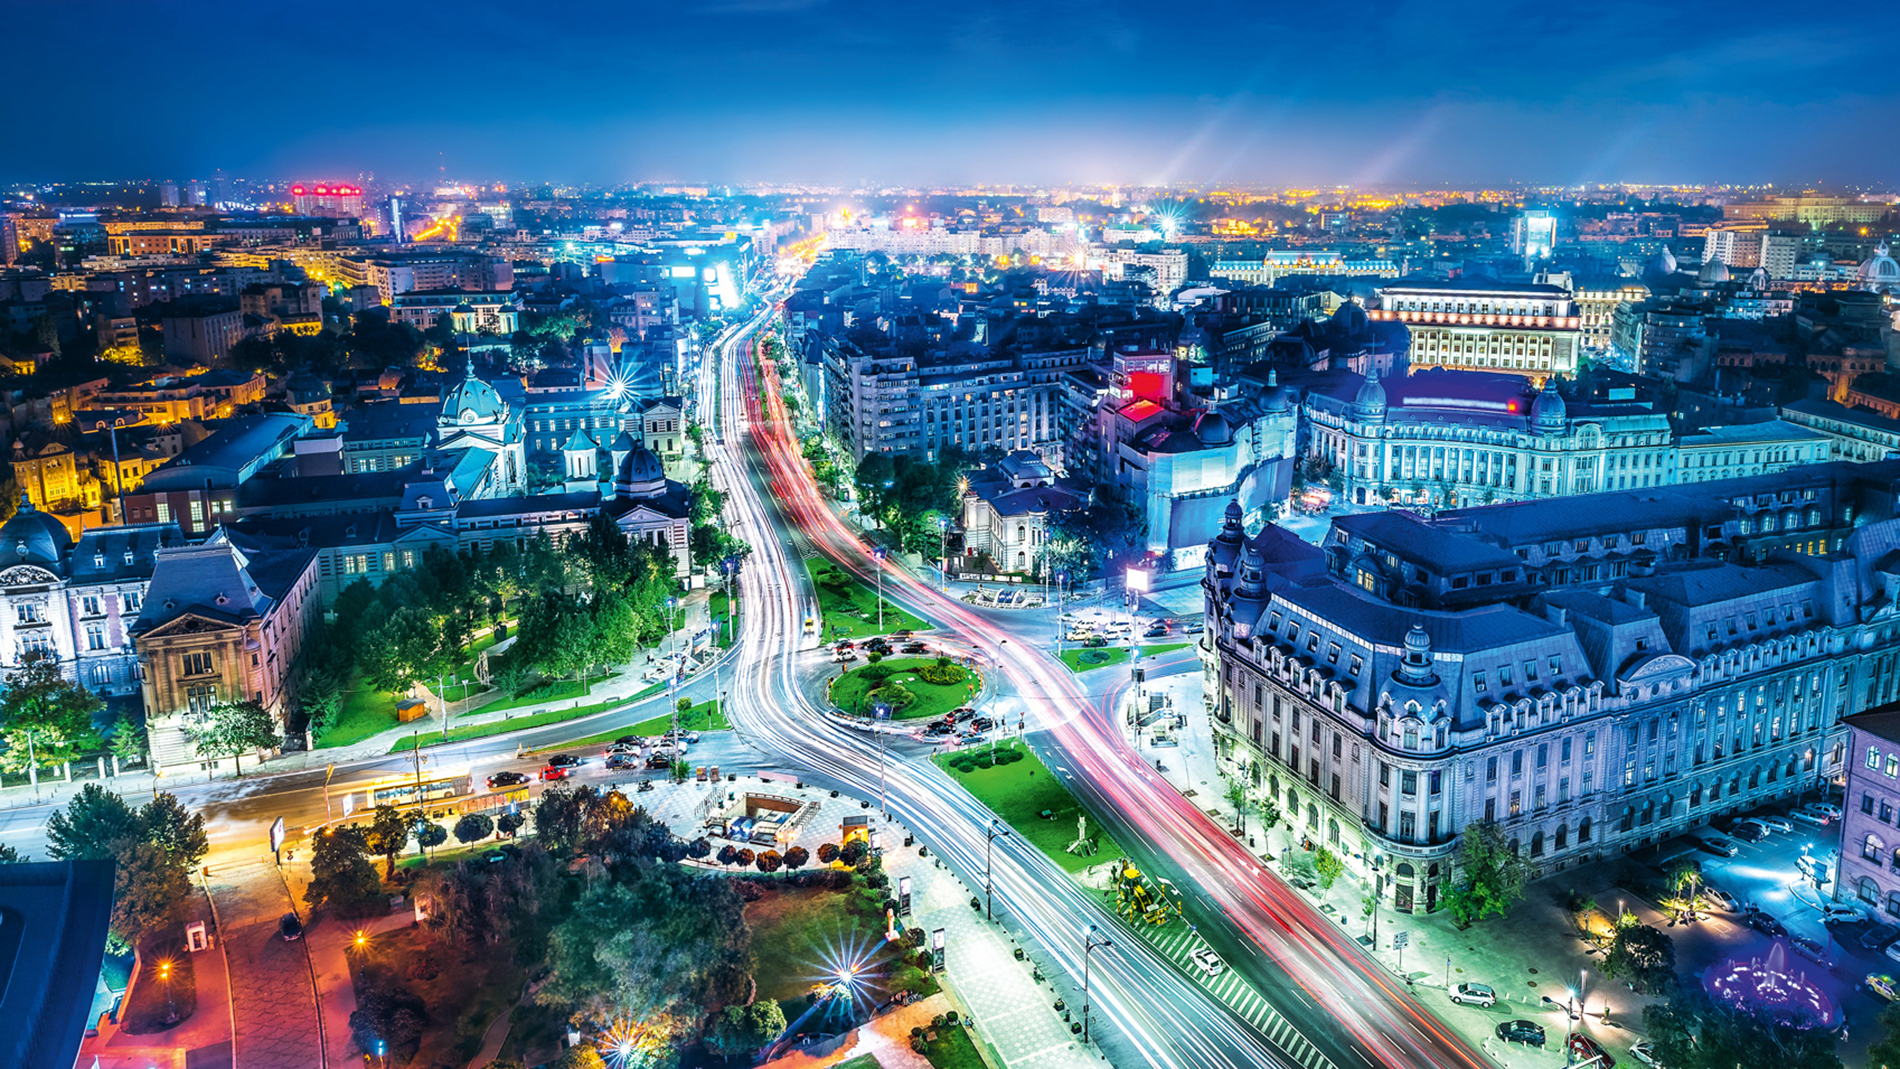 Bucharest and its 1.8 million inhabitants play a leading role in Romania's dynamic economy. Image: iStock / frankpeters